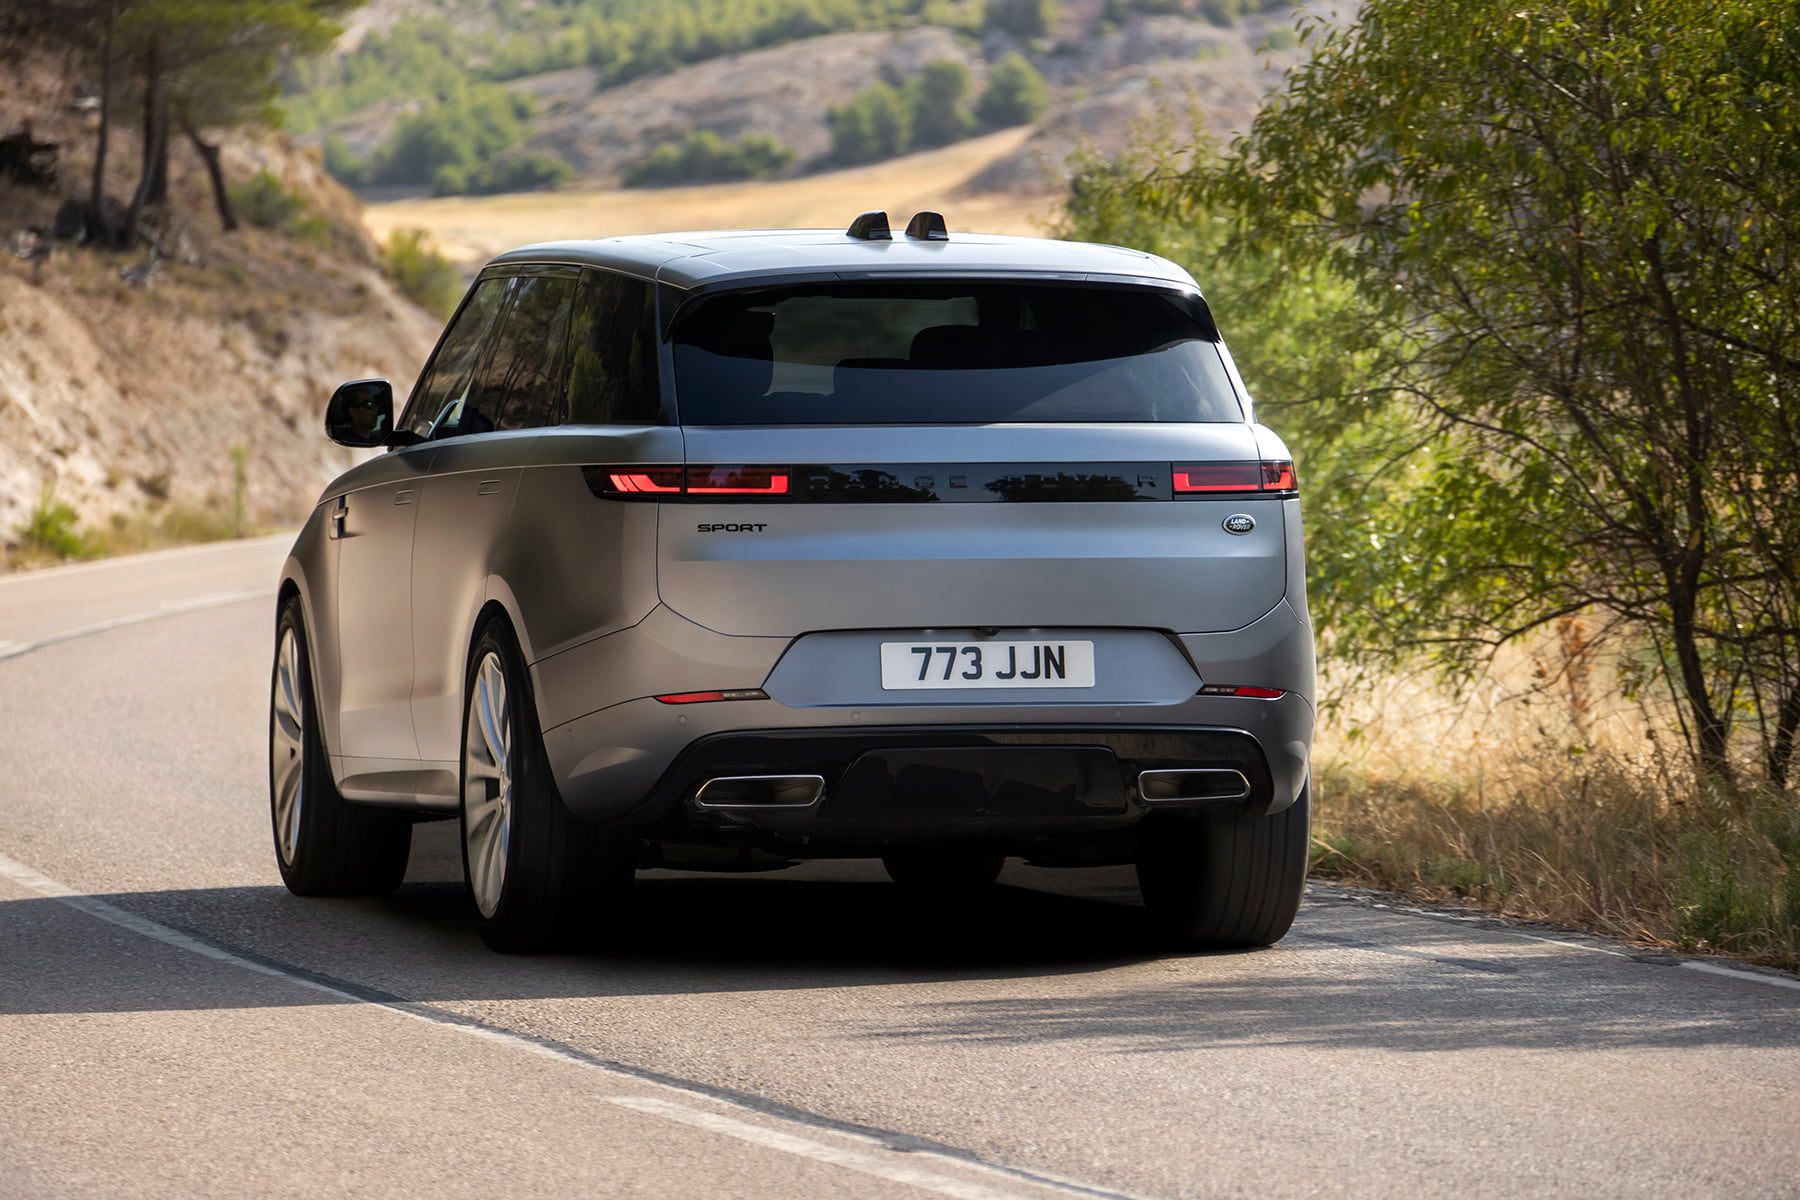 Range Rover Sport rear view | Expert Rating